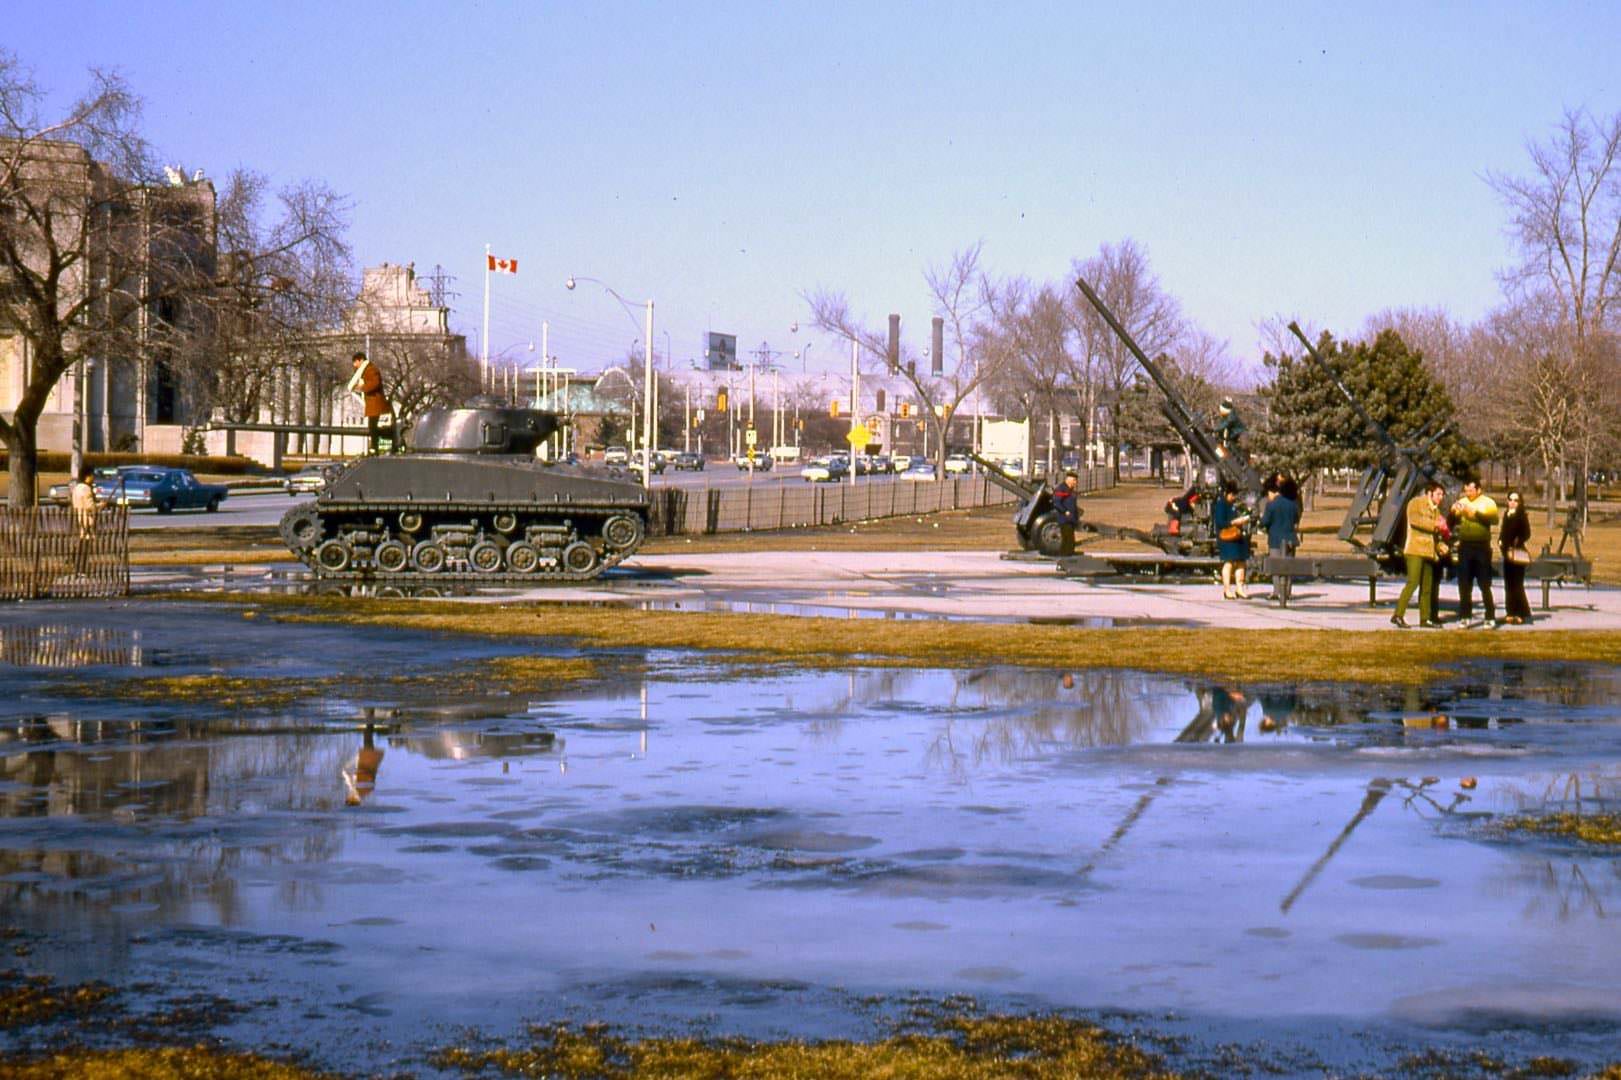 WWII relics on display at Coronation Park, Lake Shore Blvd. W., 1970